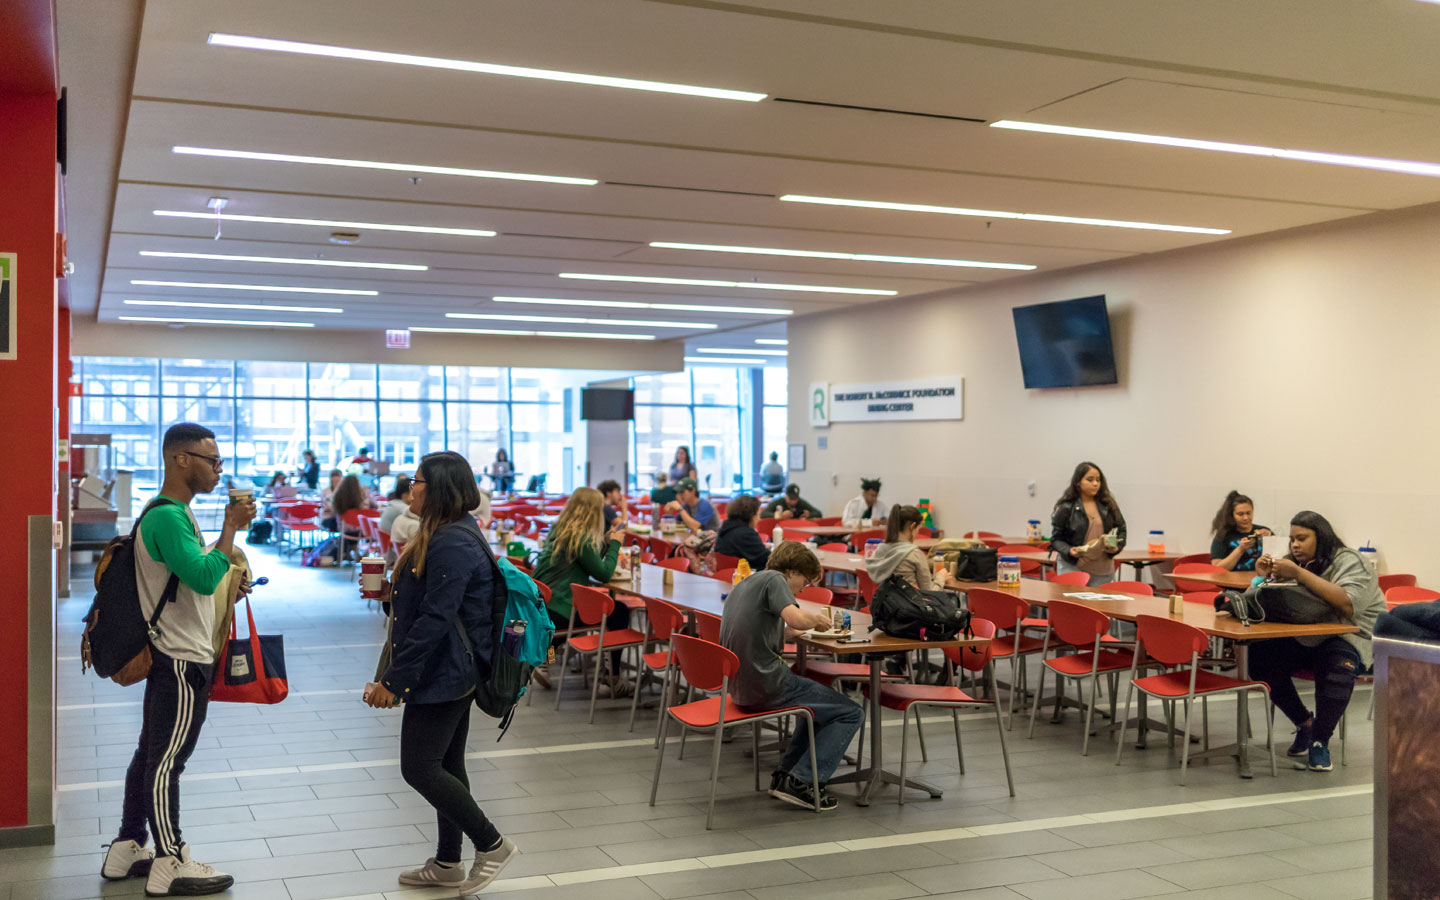 View of the dining center featuring students at number of tables and chairs.